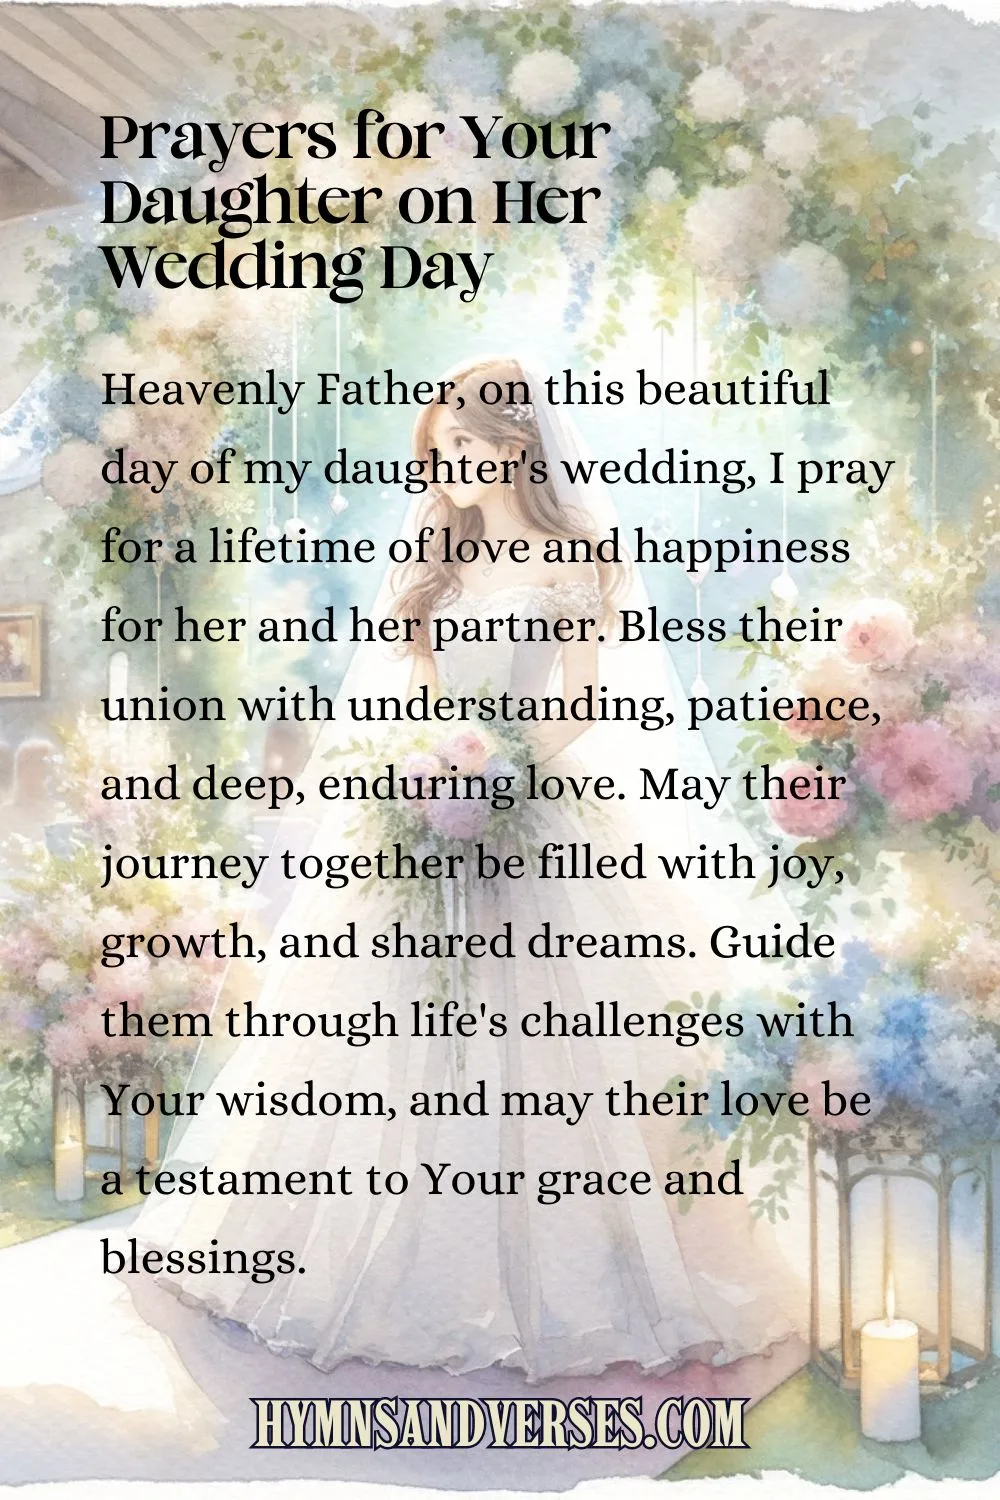 Pin image for Prayers for Your Daughter on Her Wedding Day, reads: Heavenly Father, on this beautiful day of my daughter's wedding, I pray for a lifetime of love and happiness for her and her partner. Bless their union with understanding, patience, and deep, enduring love. May their journey together be filled with joy, growth, and shared dreams. Guide them through life's challenges with Your wisdom, and may their love be a testament to Your grace and blessings.